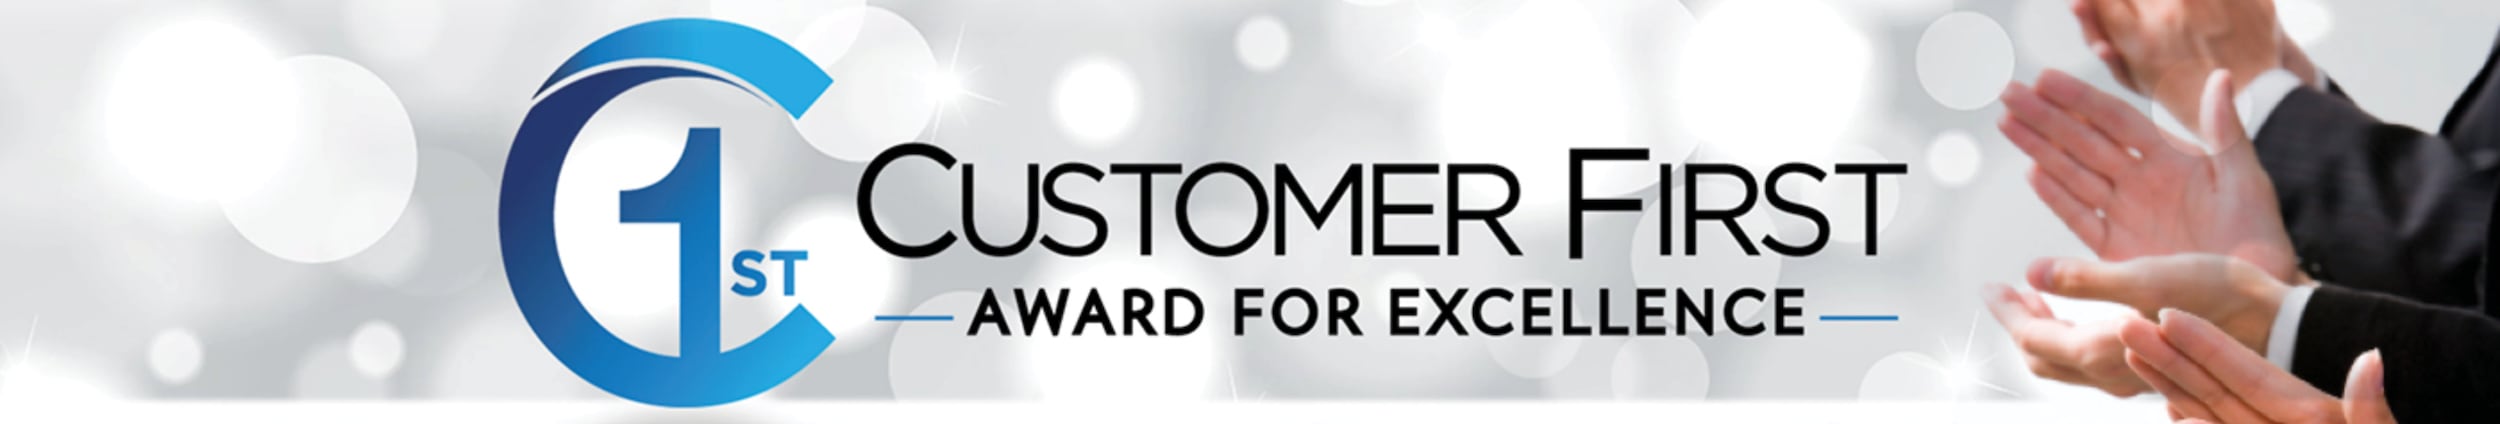 Customer First Award for Excellence | St. Clair Chrysler Jeep Dodge Ram